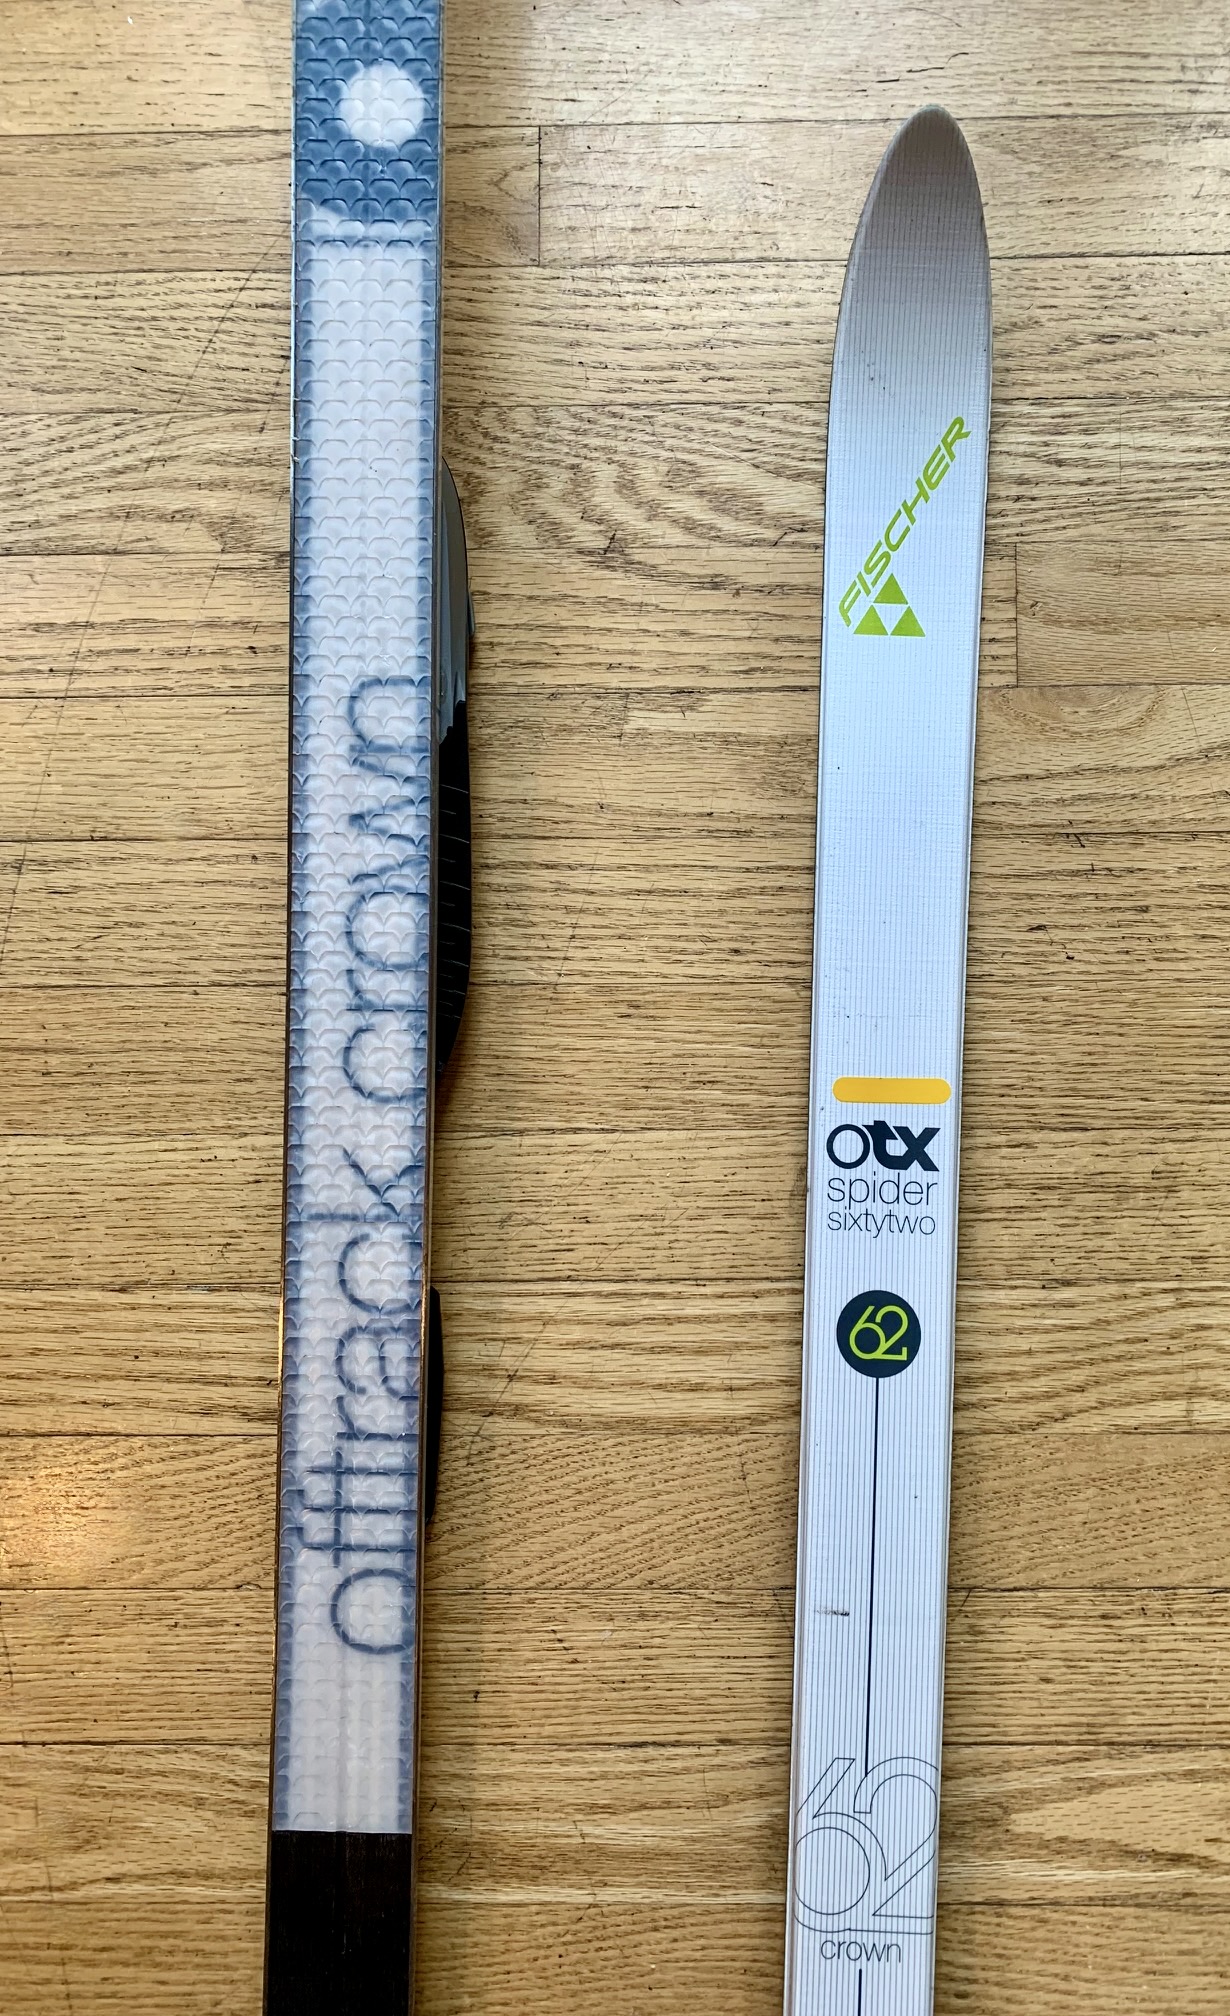 Crossblades split the difference between backcountry skis and